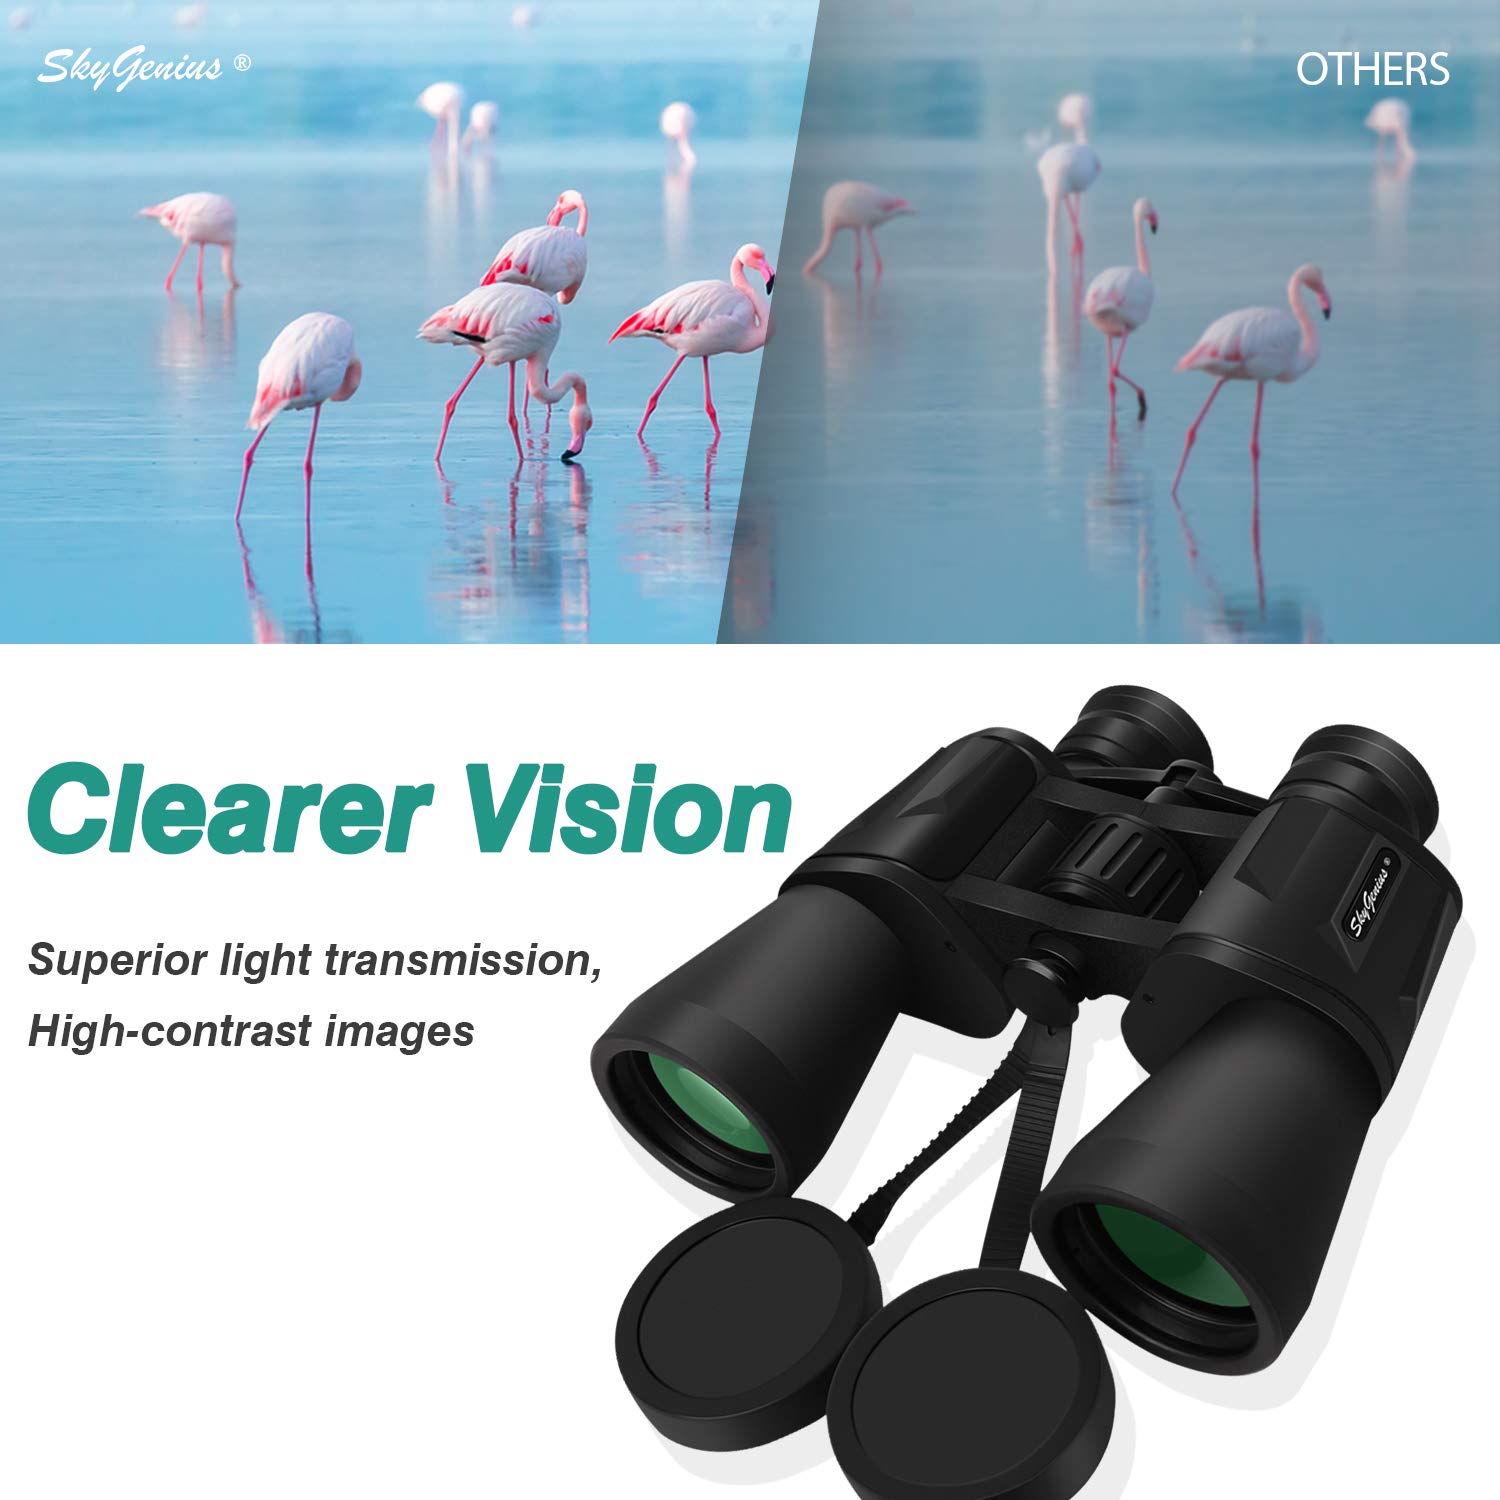 SkyGenius 10 x 50 Binoculars for Adults Powerful Full-Size, Clear Durable Binoculars for Bird Watching Sightseeing Wildlife Watching Traveling Stargazing with Low Light Night Vision